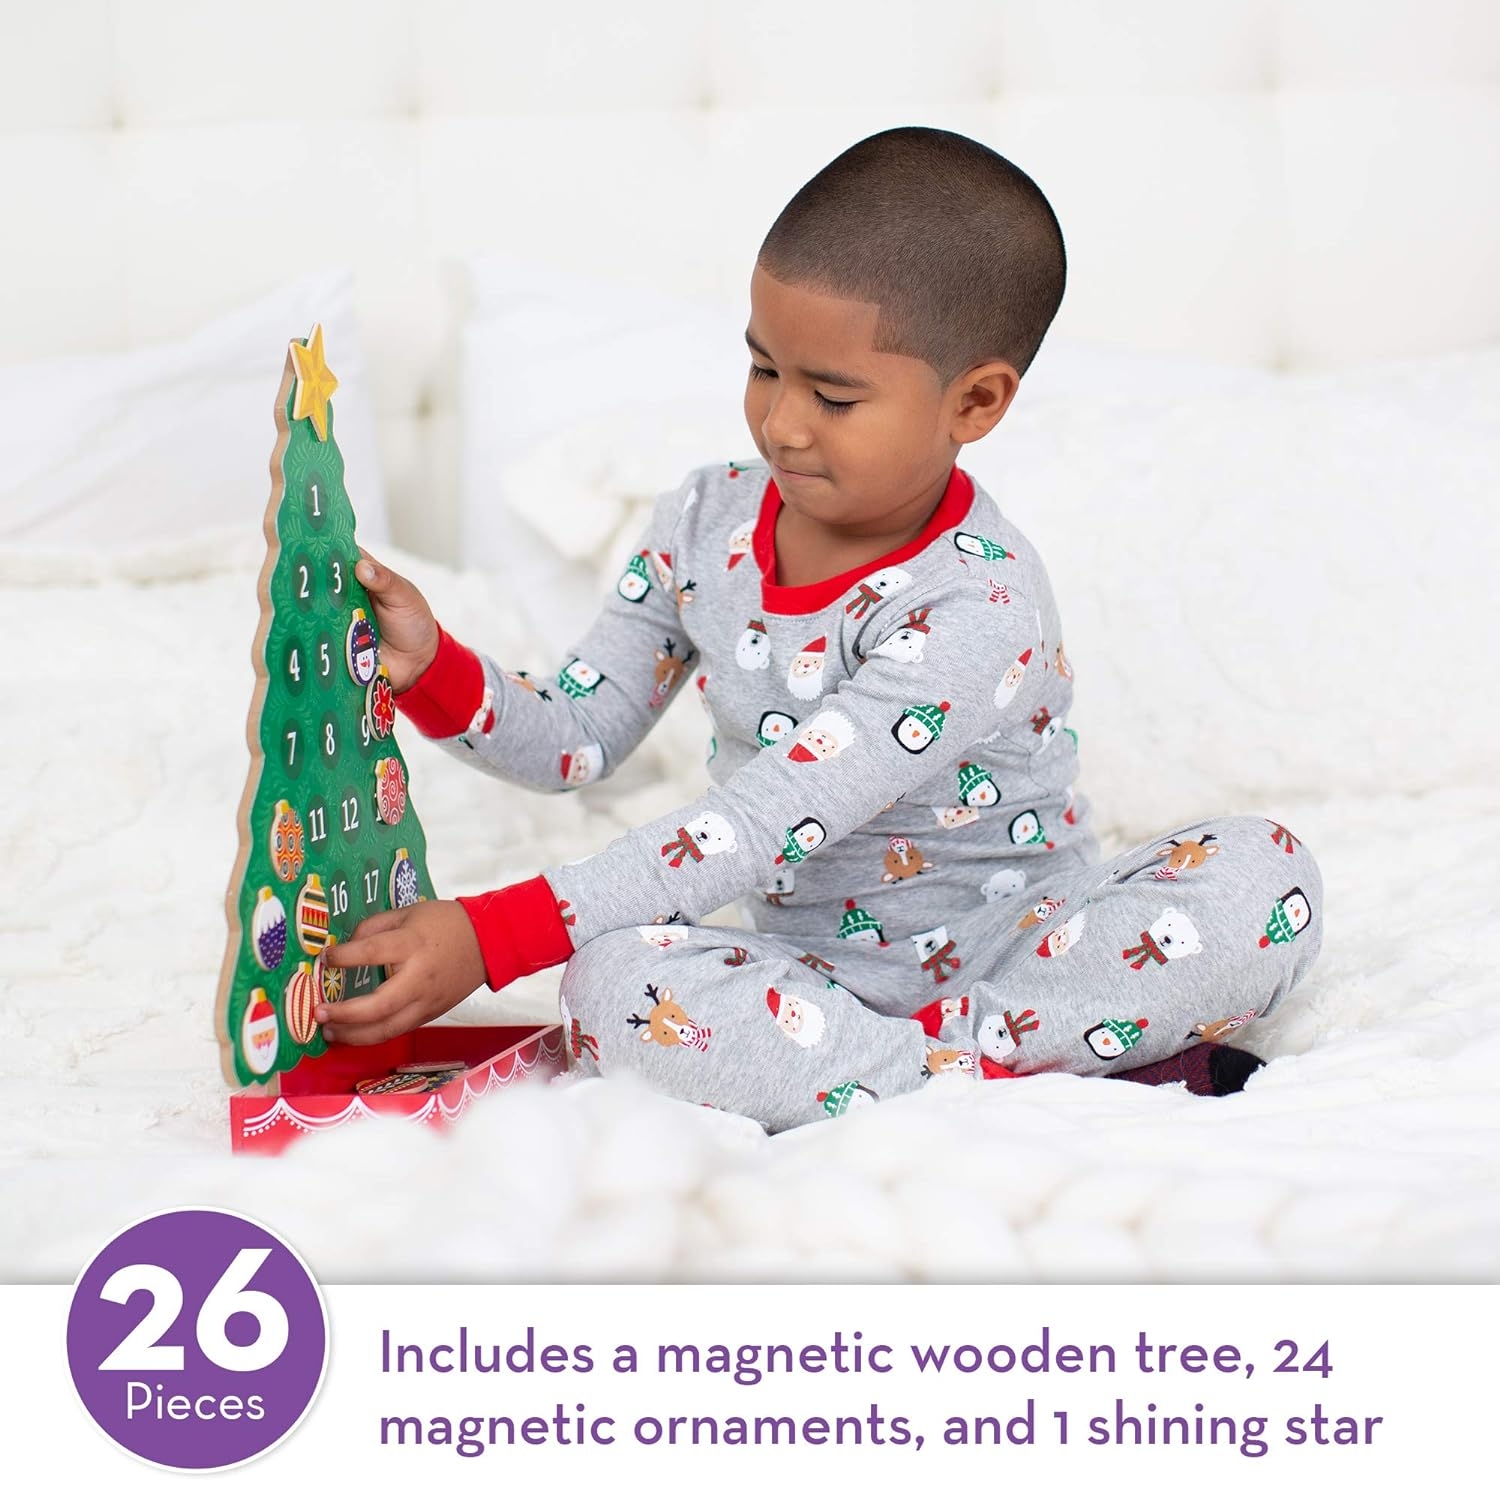 Melissa & Doug Countdown to Christmas Wooden Advent Calendar (Seasonal & Religious, Magnetic Tree, 25 Magnets, Great Gift for Girls and Boys - Best for 3, 4, 5, 6 and 7 Year Olds)